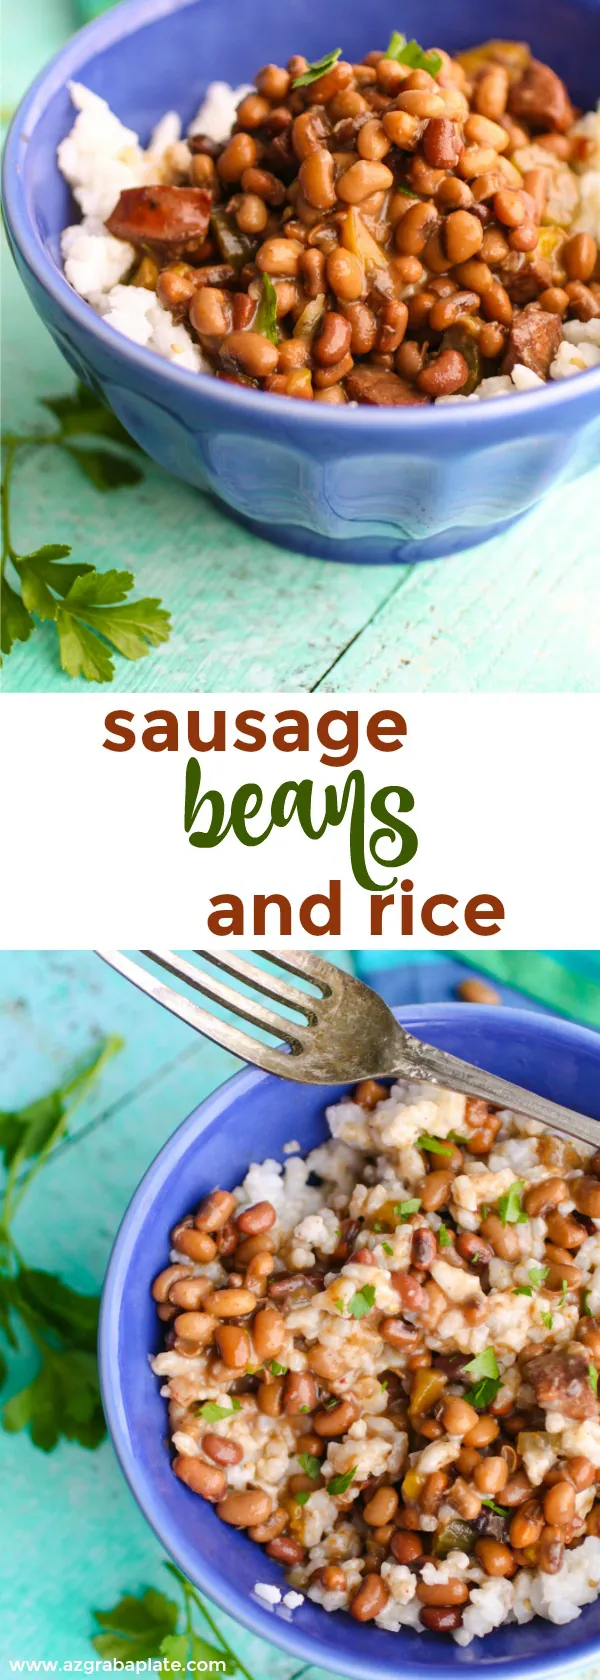 Sausage, Beans, and Rice is a Southern-inspired, hearty and flavorful dish. Now that the cool weather is here, it's perfect!